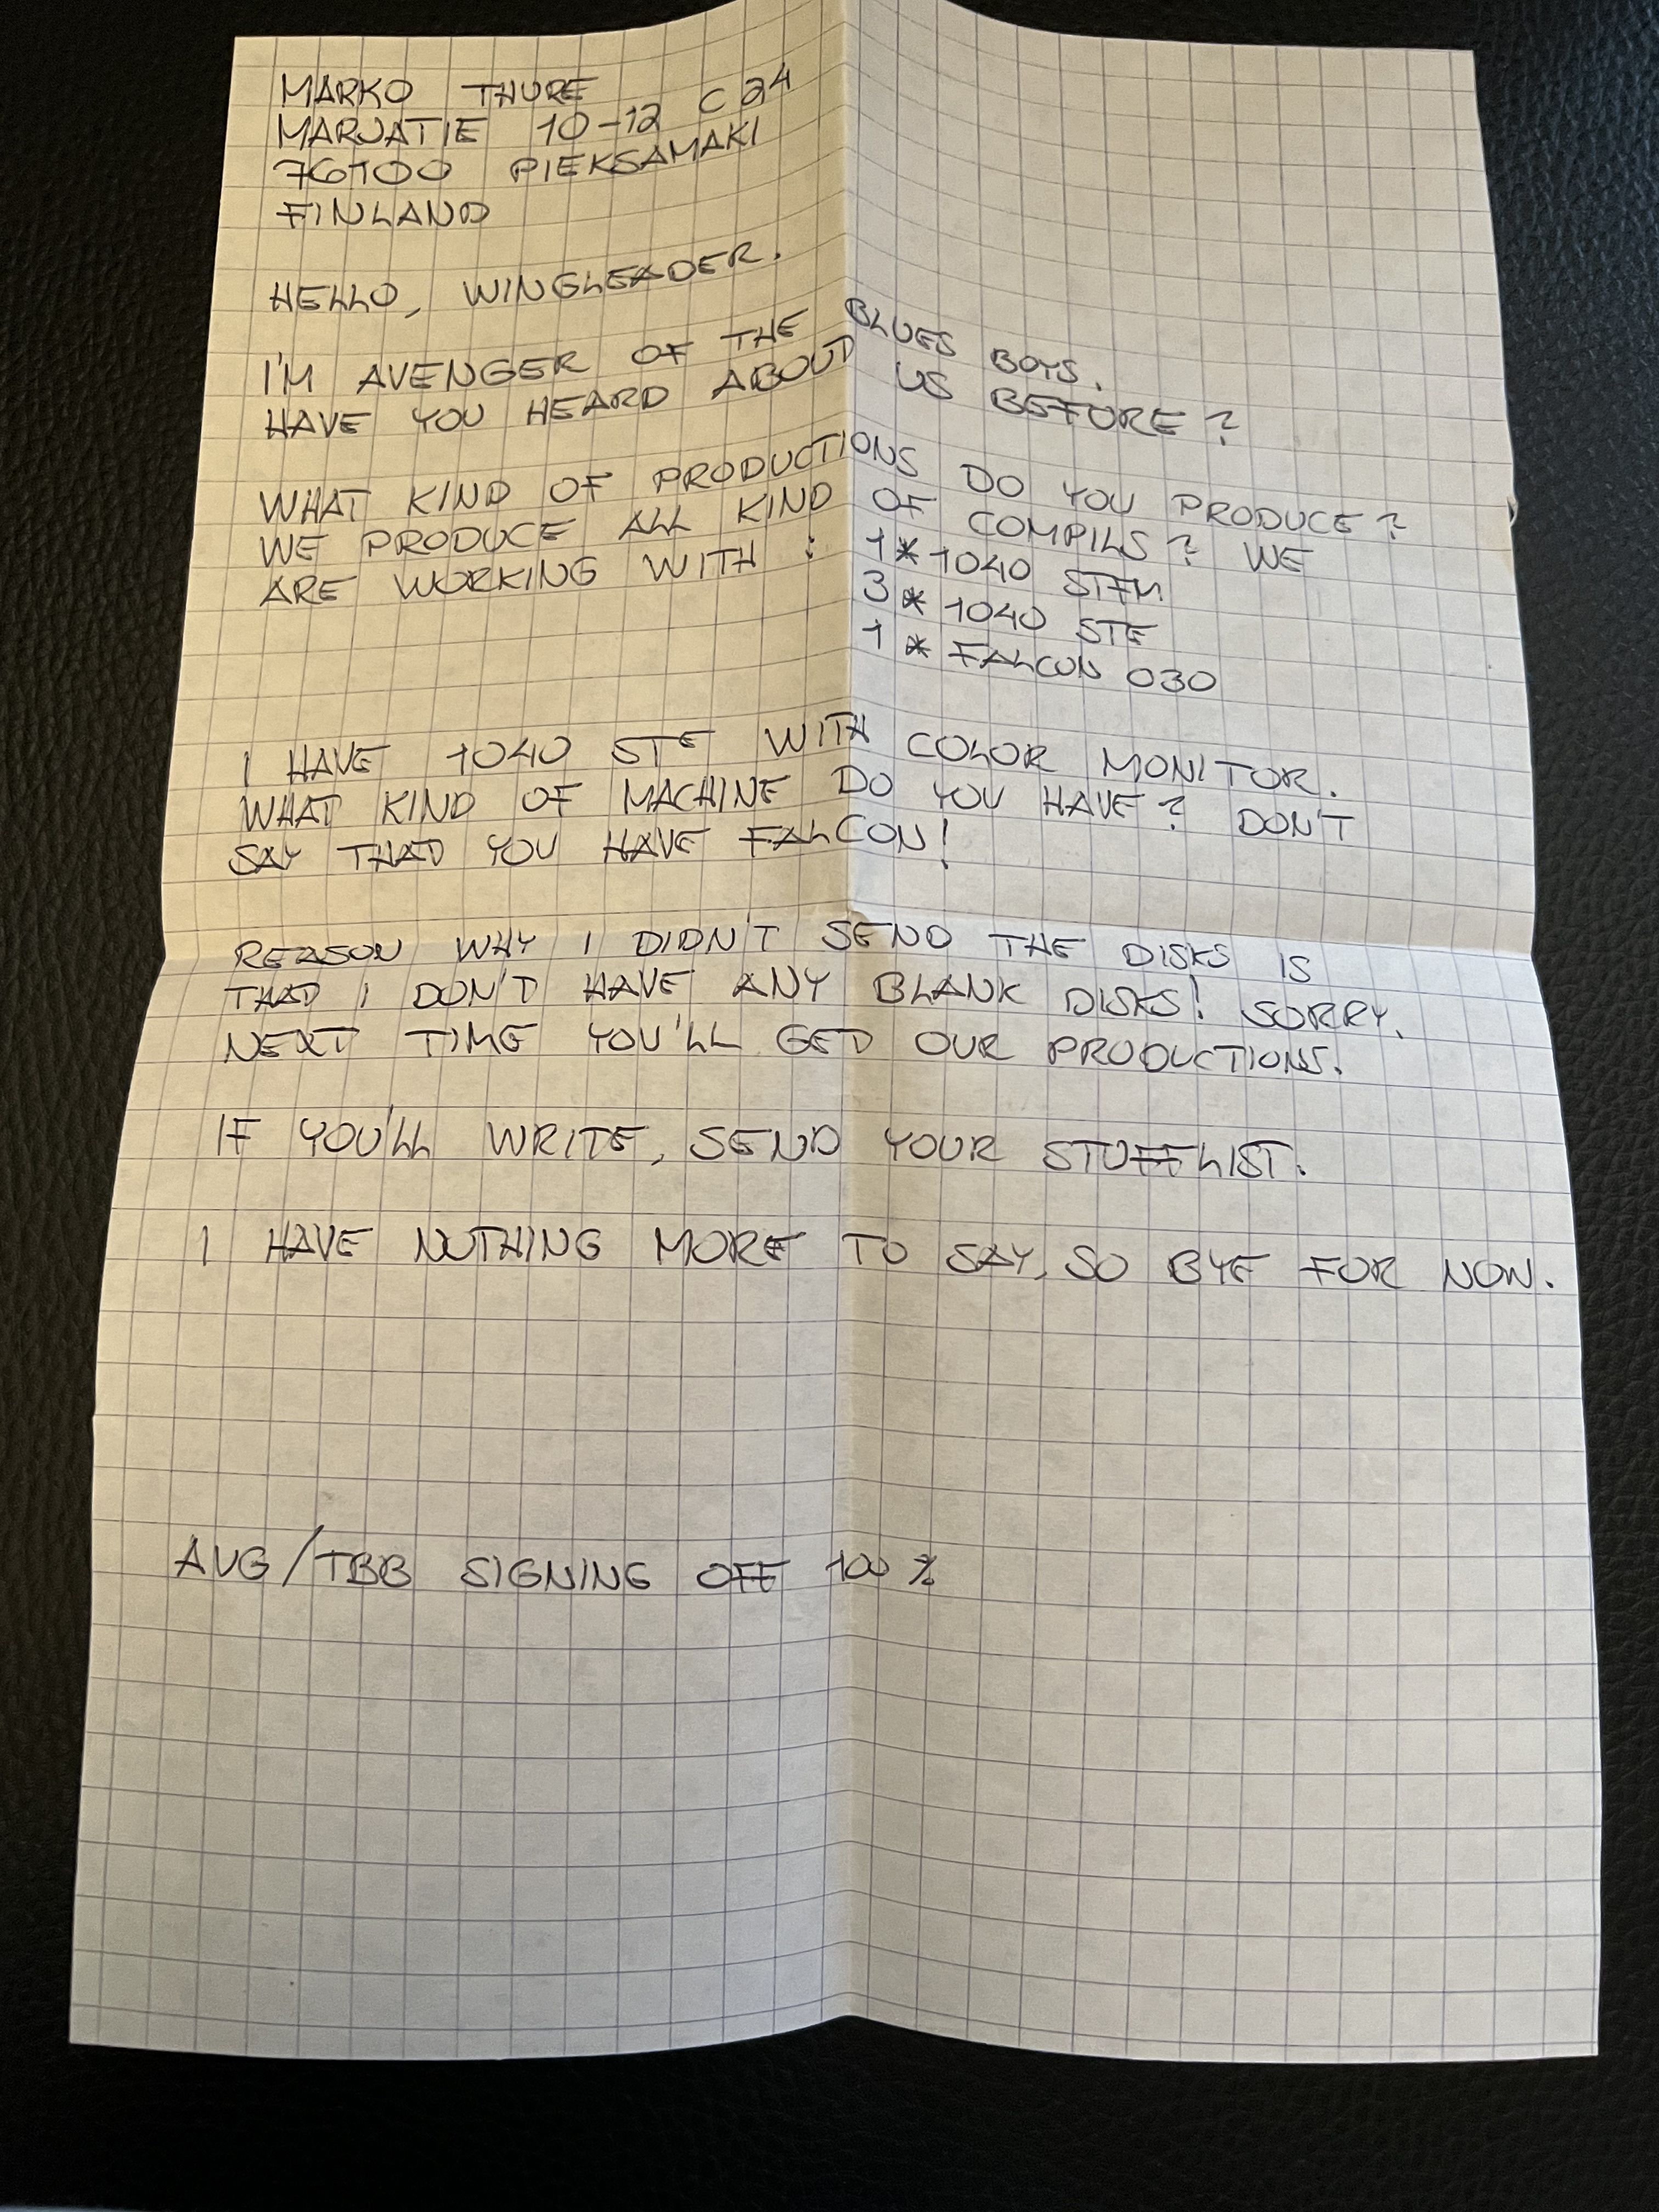 The days before email. Demo teams all over Europe wrote letters to each other.